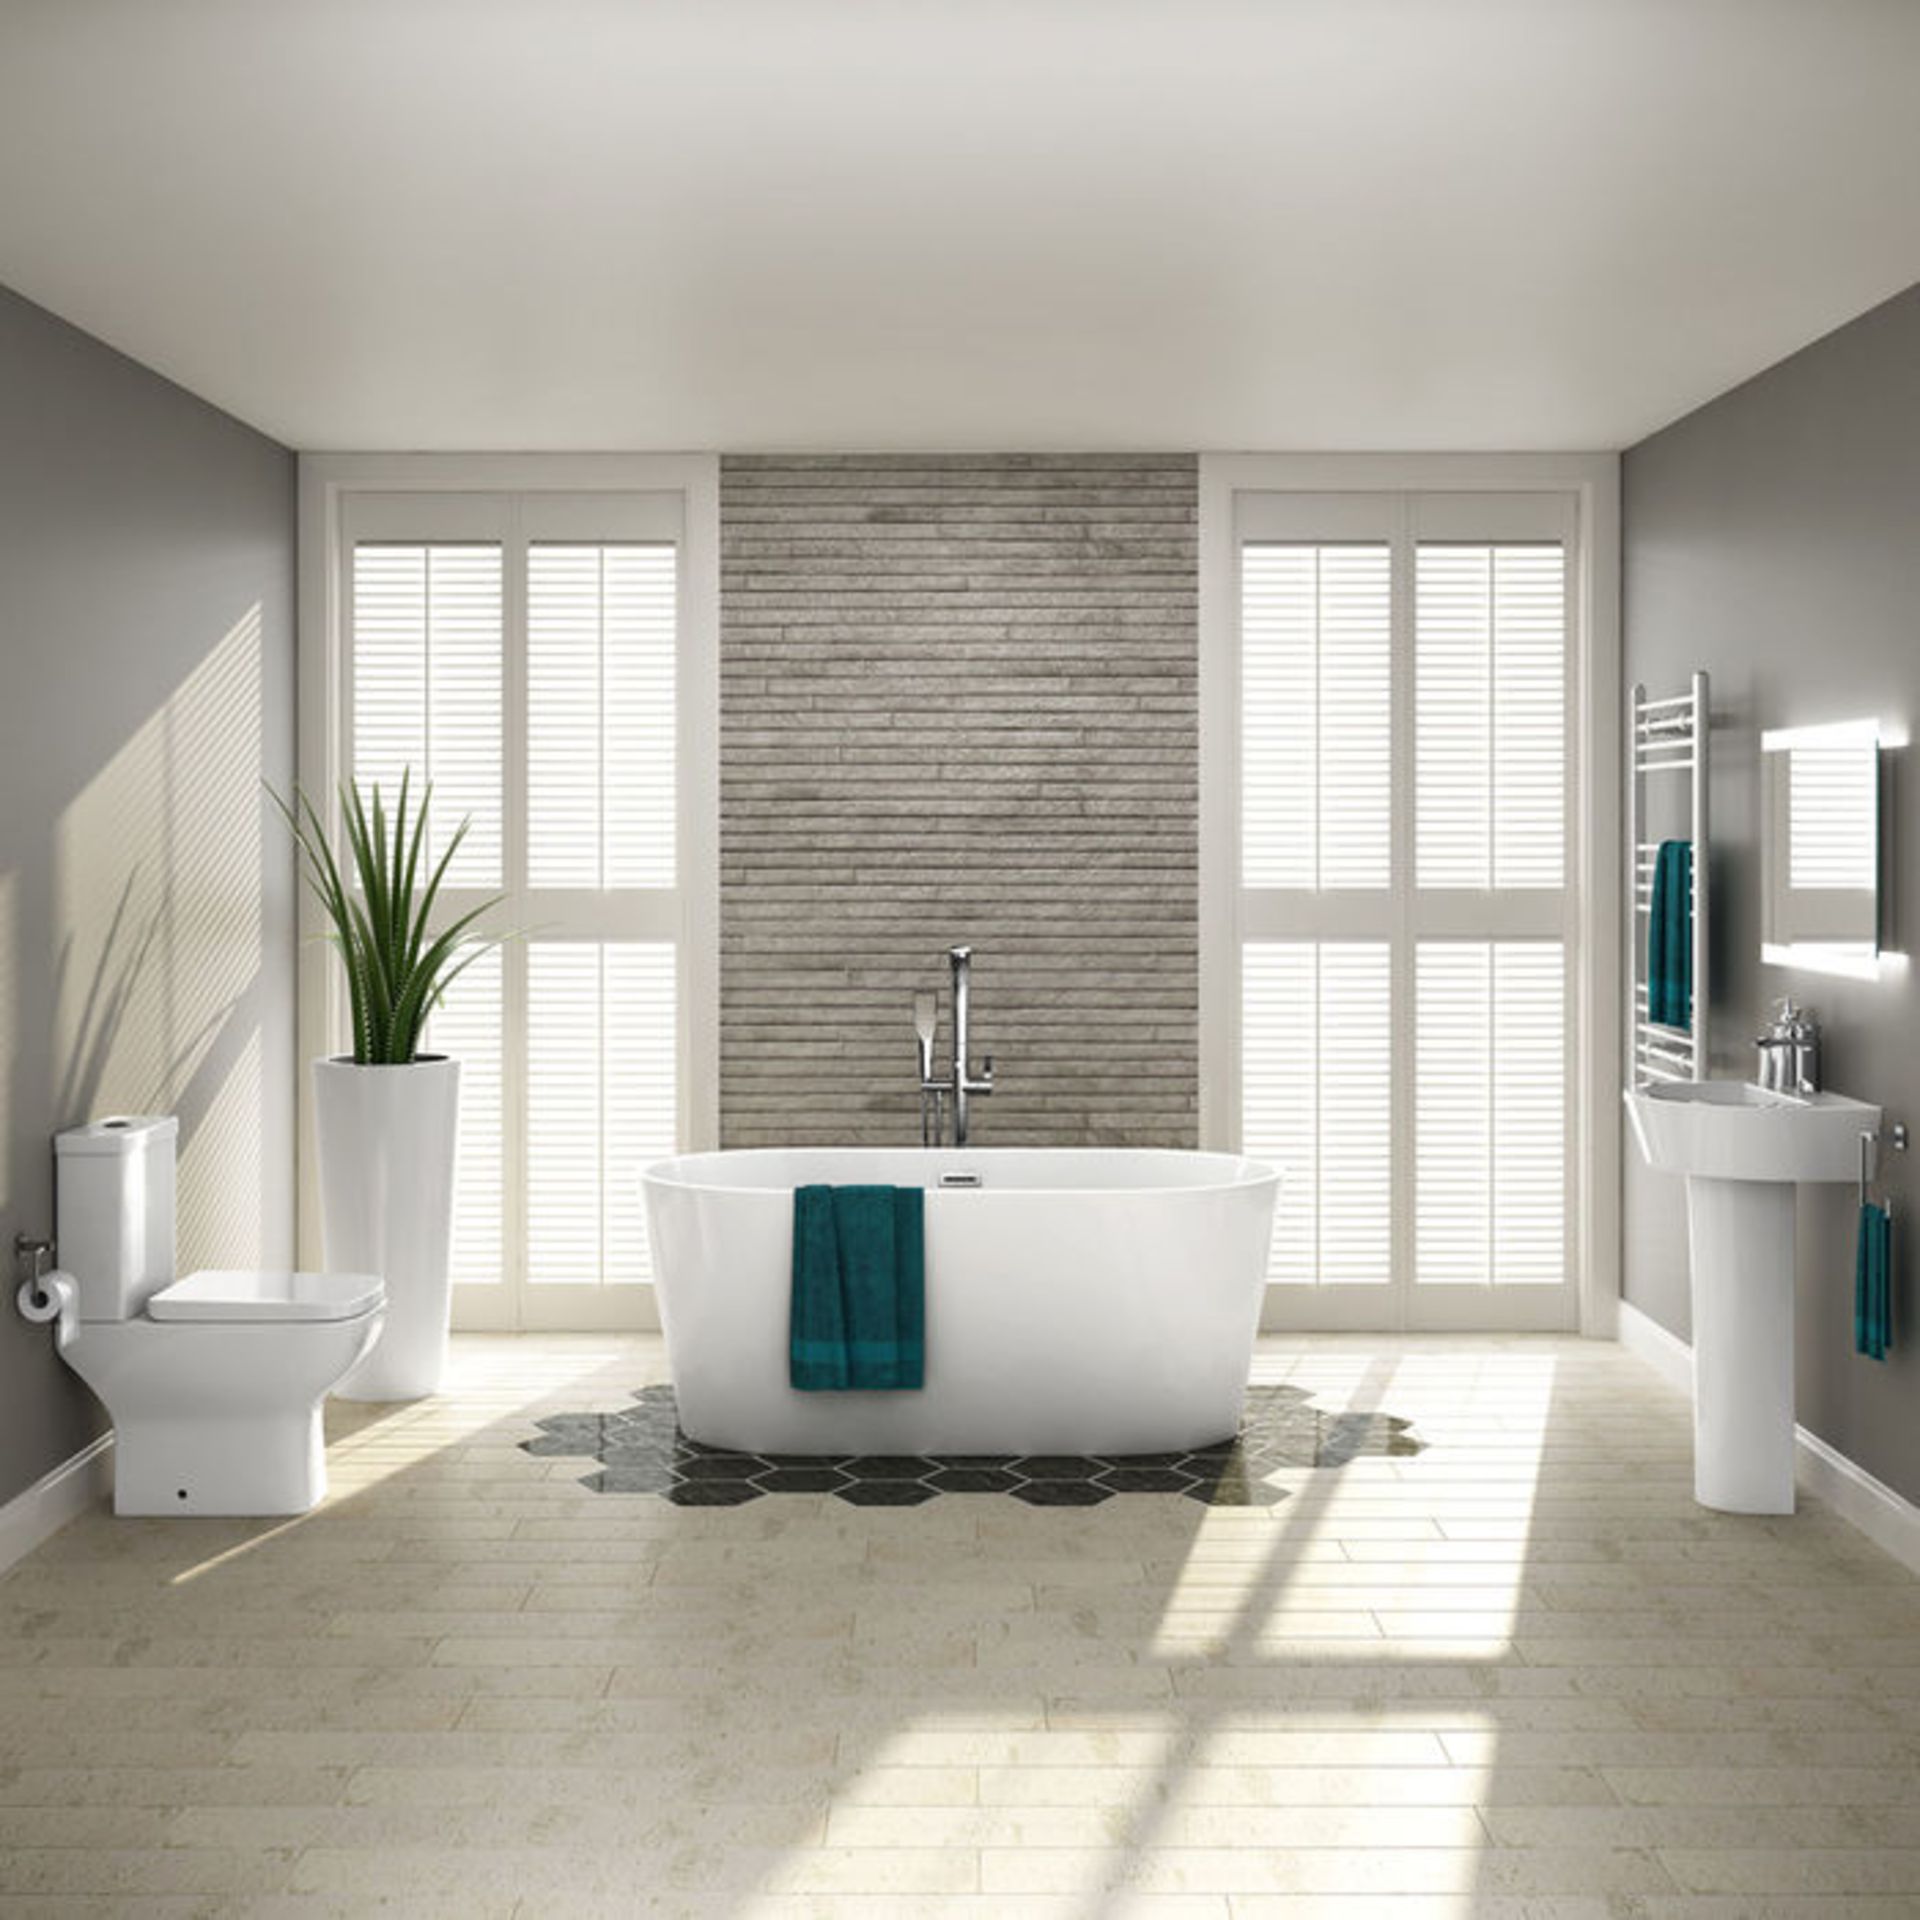 (VN4) 1500x750mm Ava Slimline Freestanding Bath. Expertly crafted, Ava is finished in high gloss and - Image 6 of 6